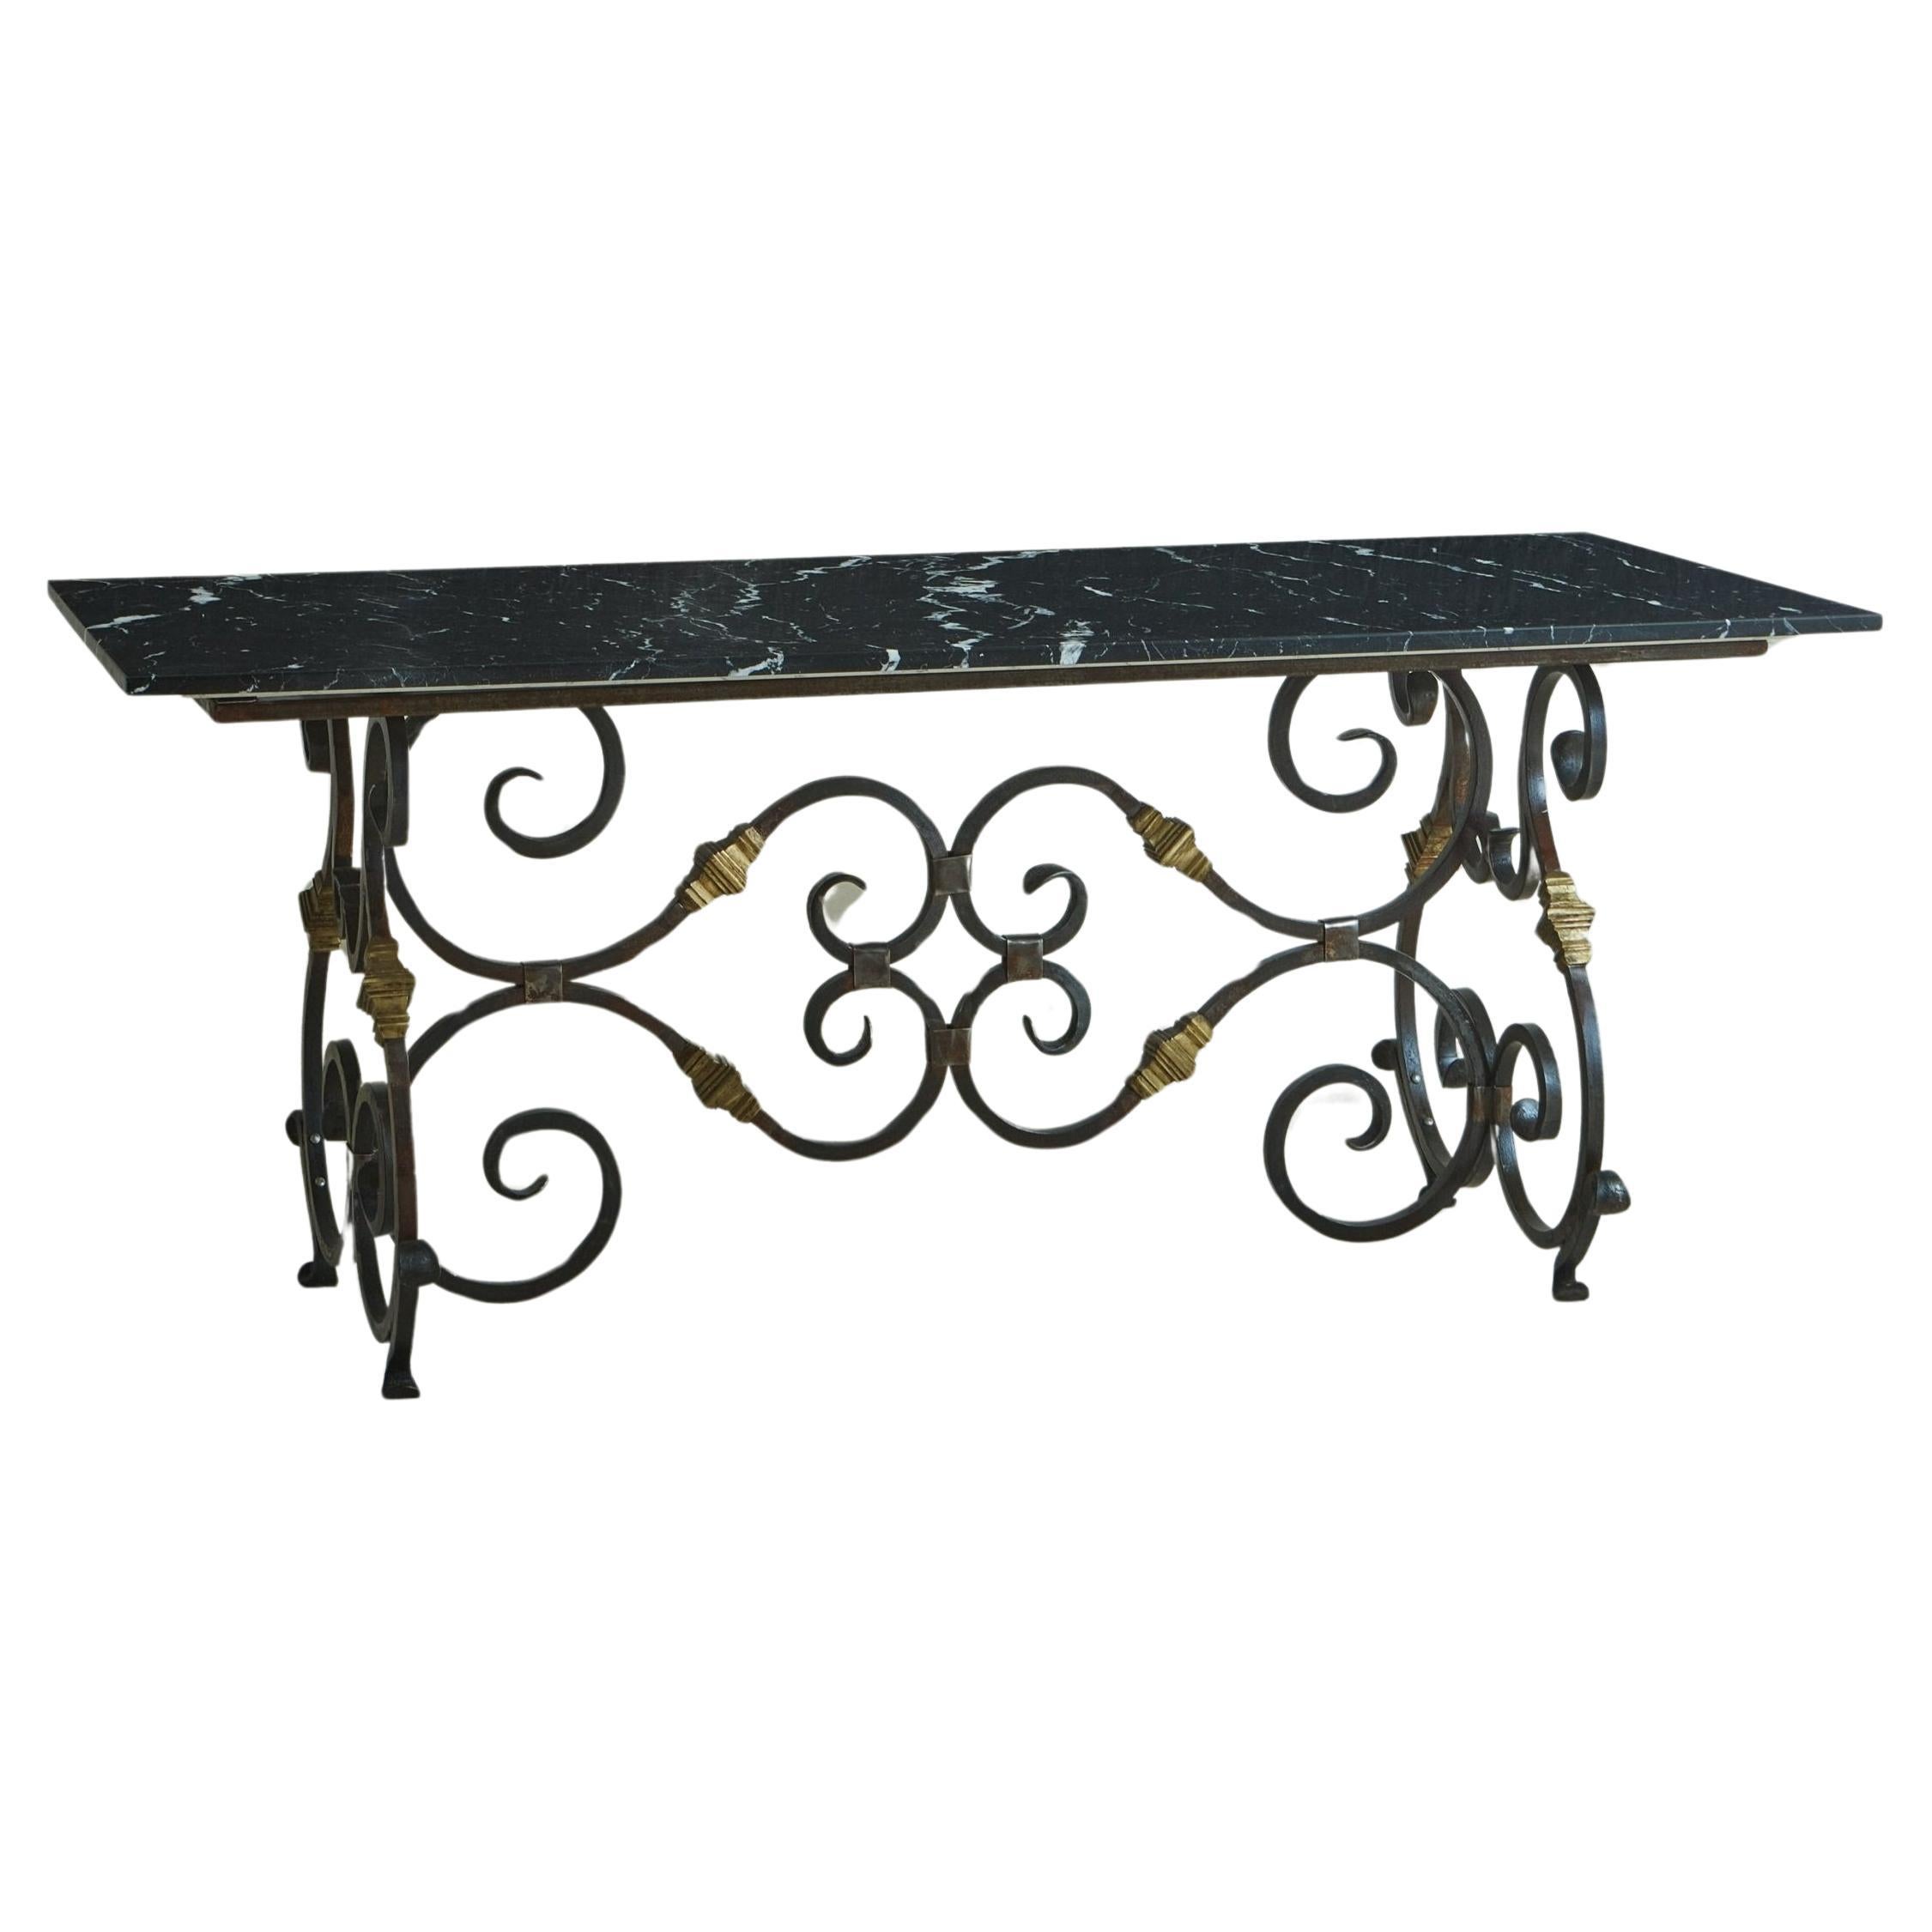 Nero Marquina Marble Dining Table with Wrought Iron Base, France 19th Century For Sale